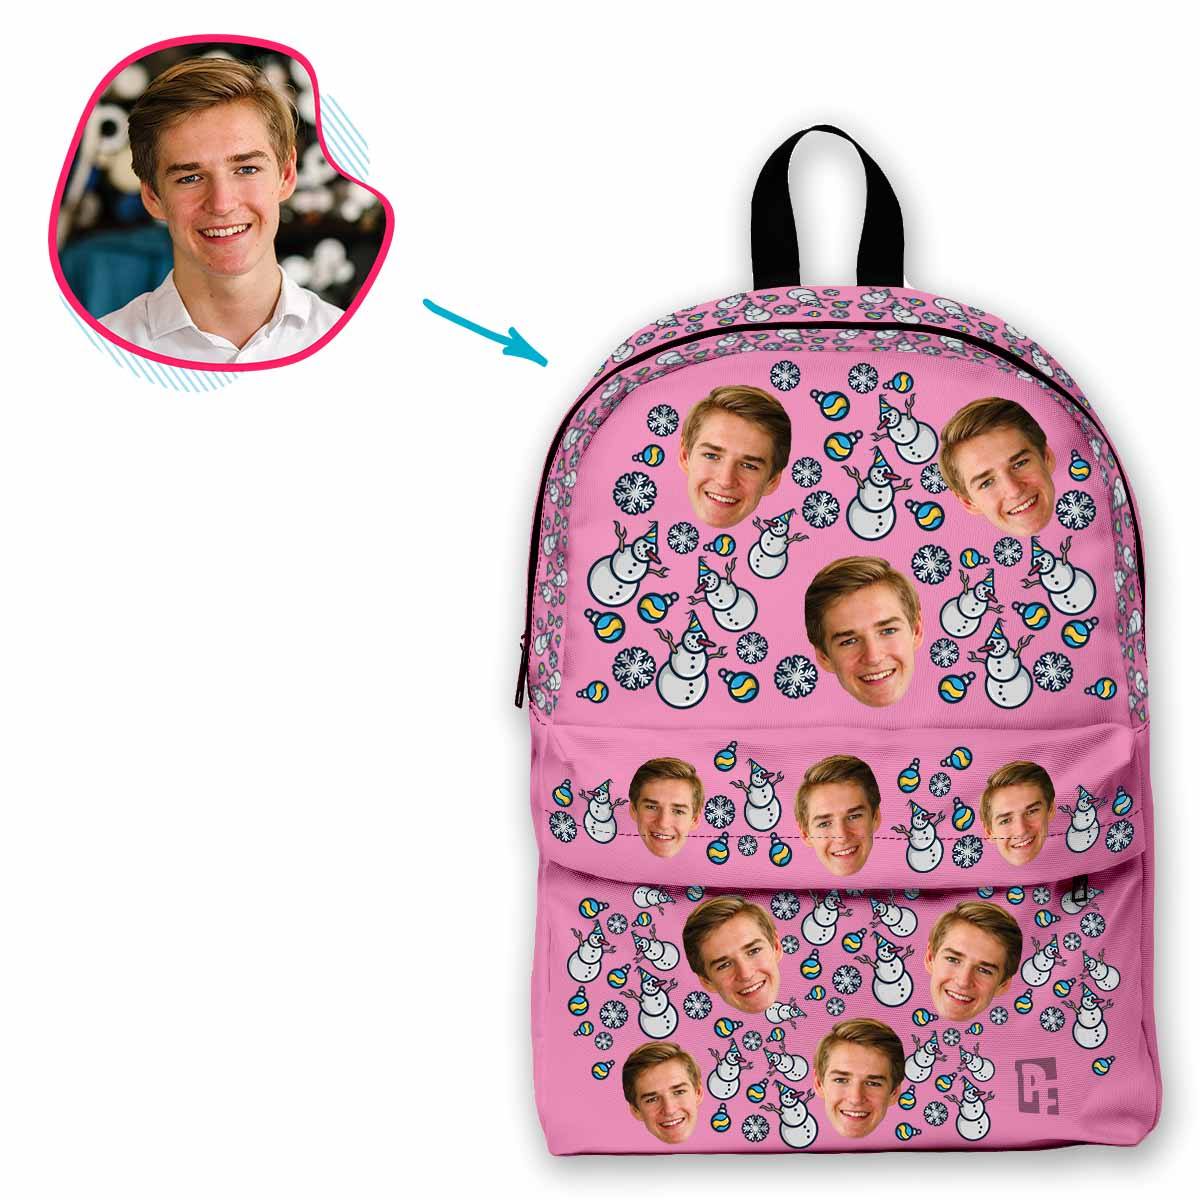 pink Snowman classic backpack personalized with photo of face printed on it